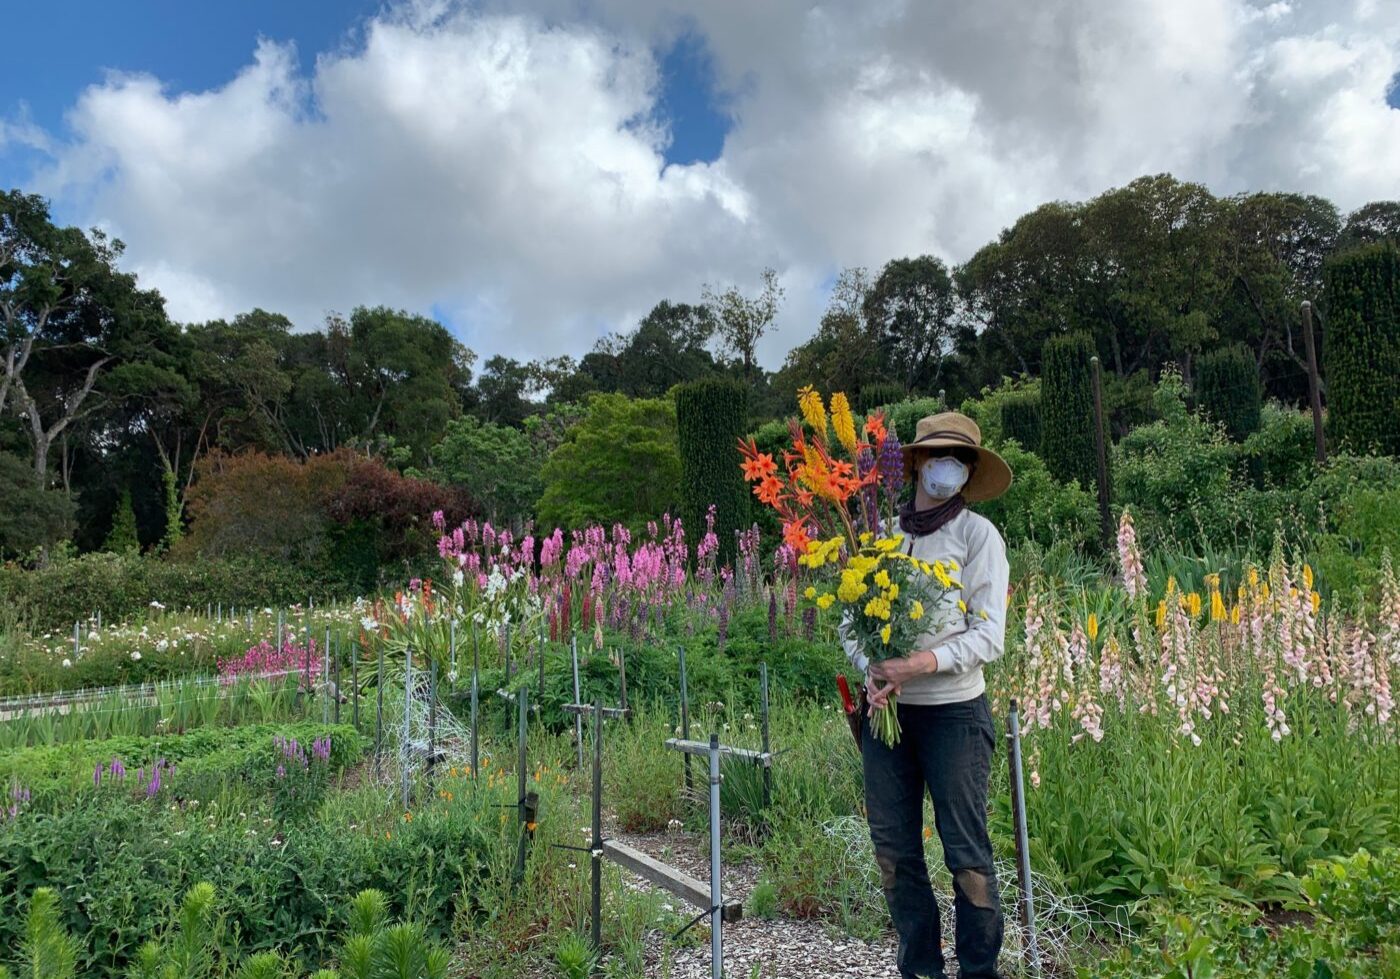 General Support consists of single-day, seasonal and short term projects in the Horticulture and Collections departments. These assignments do not usually require additional training beyond the initial volunteer orientation. There is no minimum service hours requirement to participate in General Support.